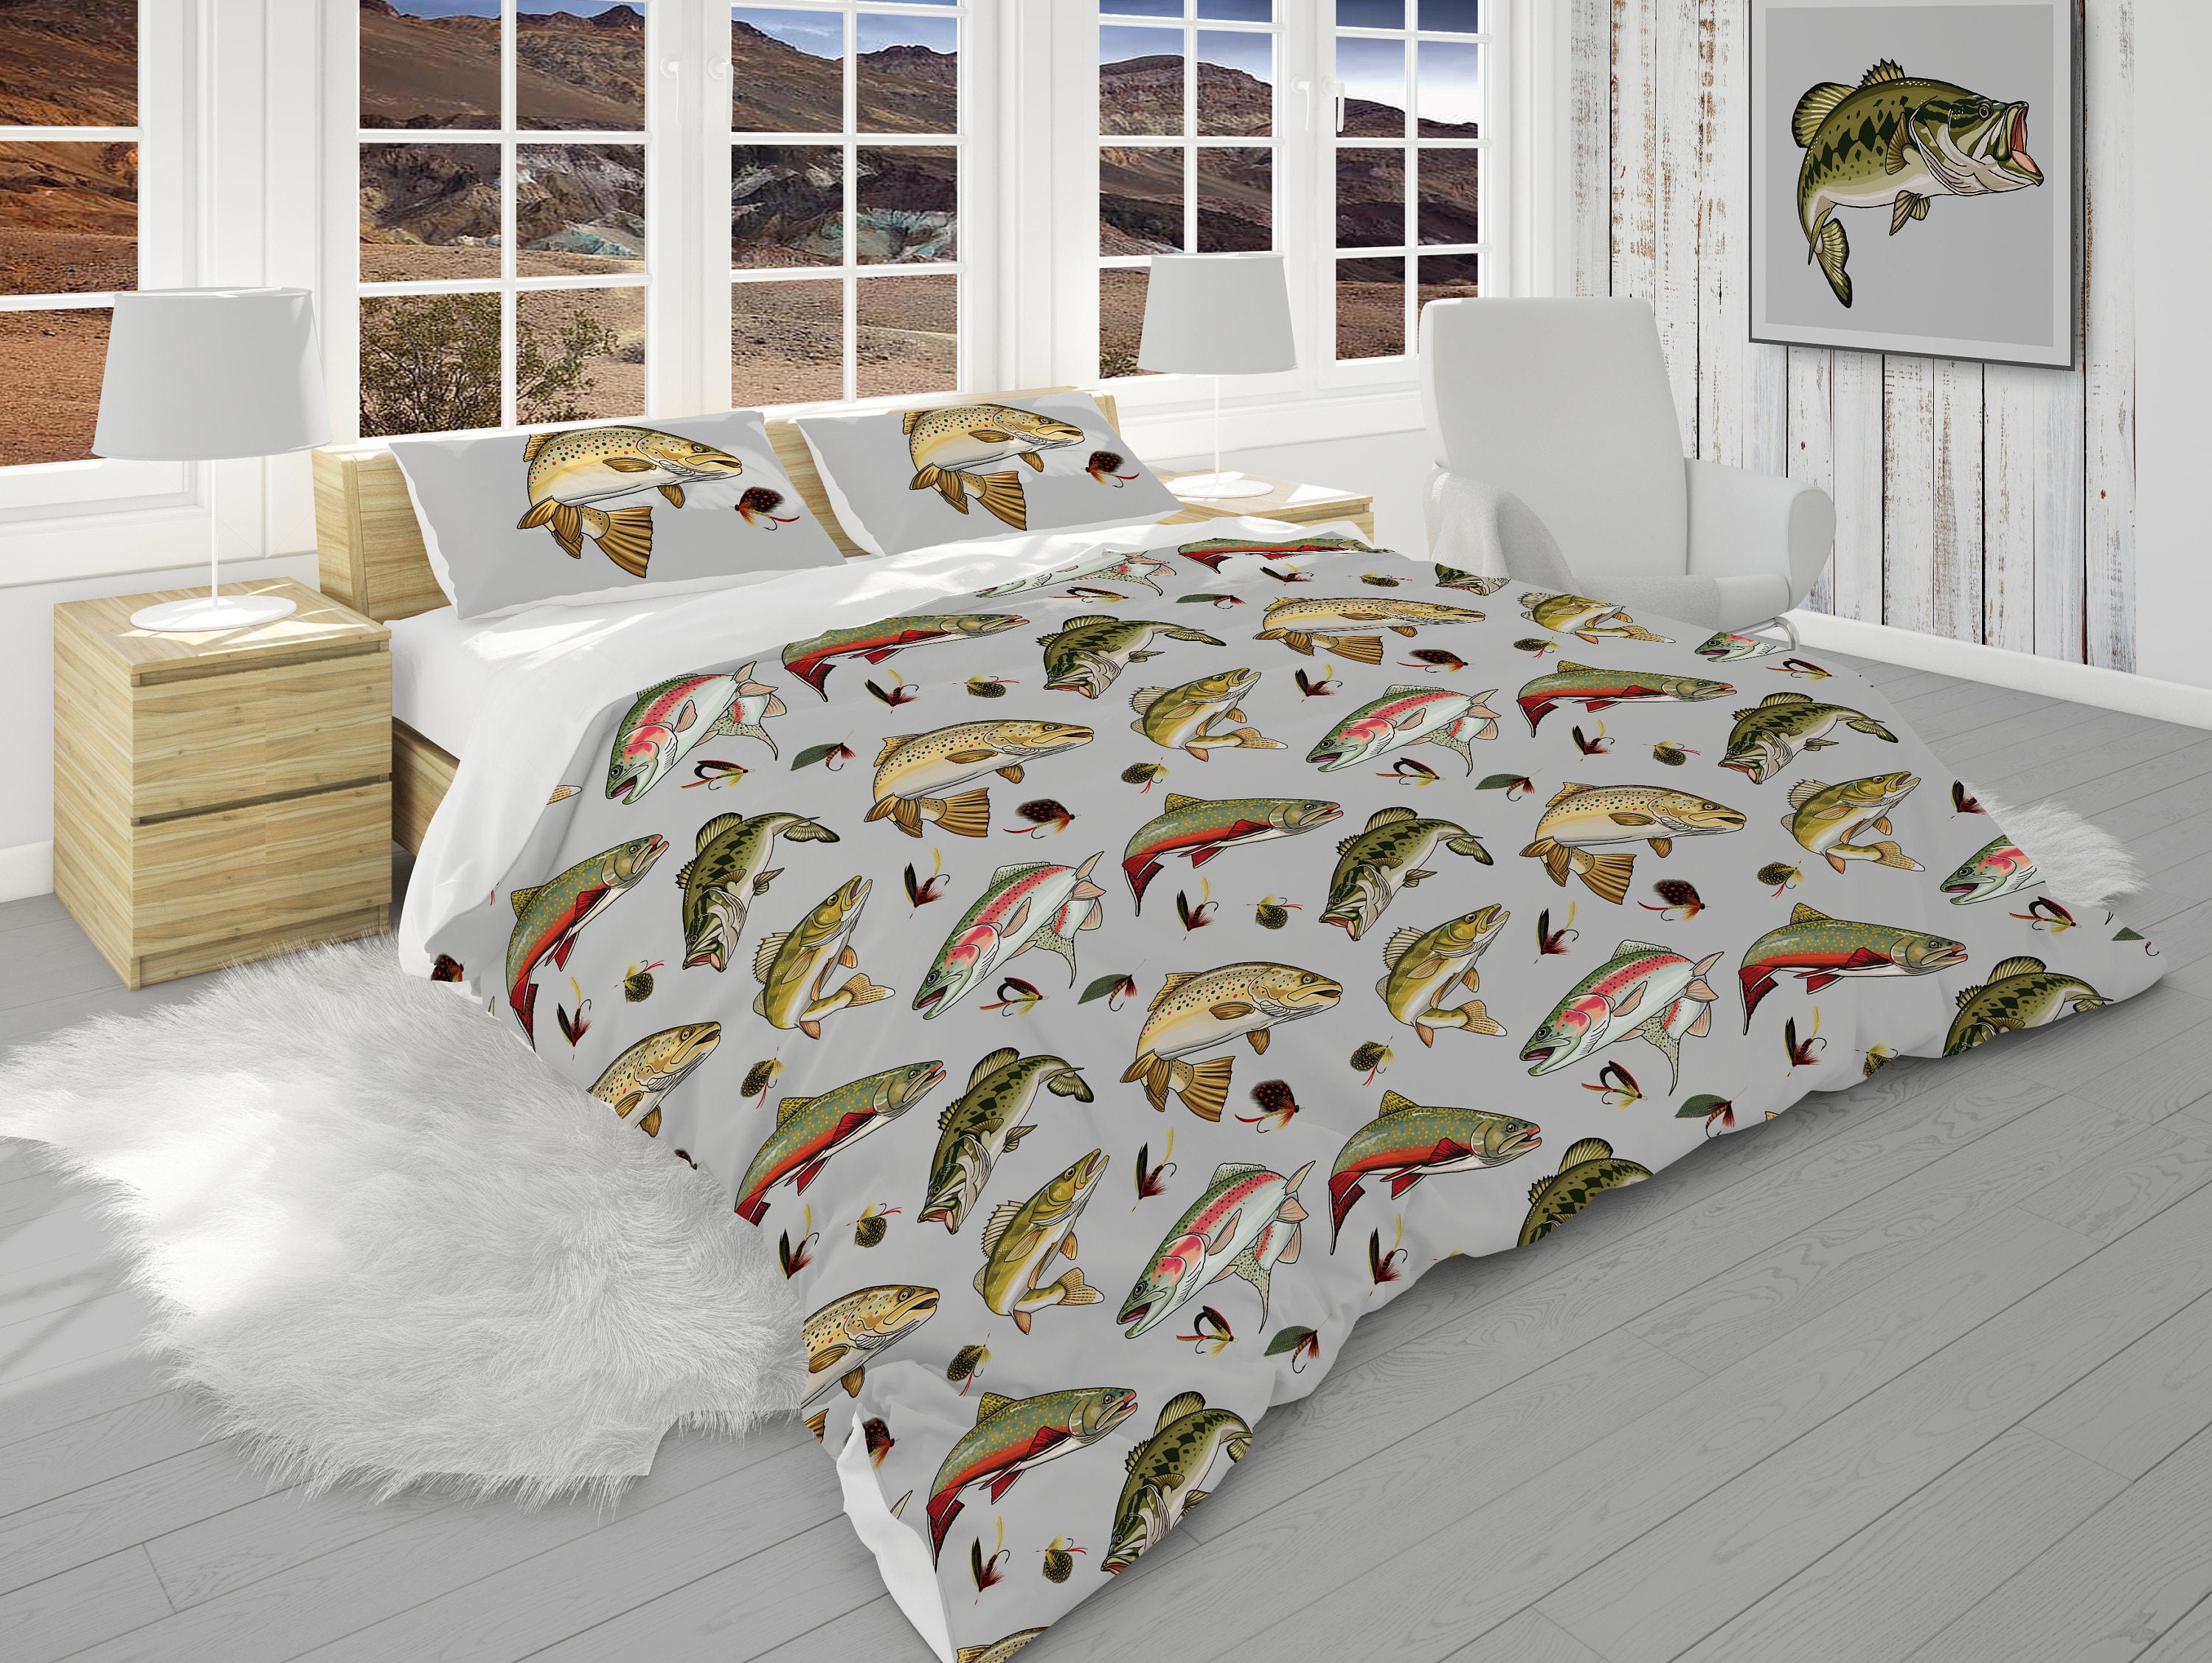 Comforter Set With Pillow Shams With Fish, Beach House Bedding